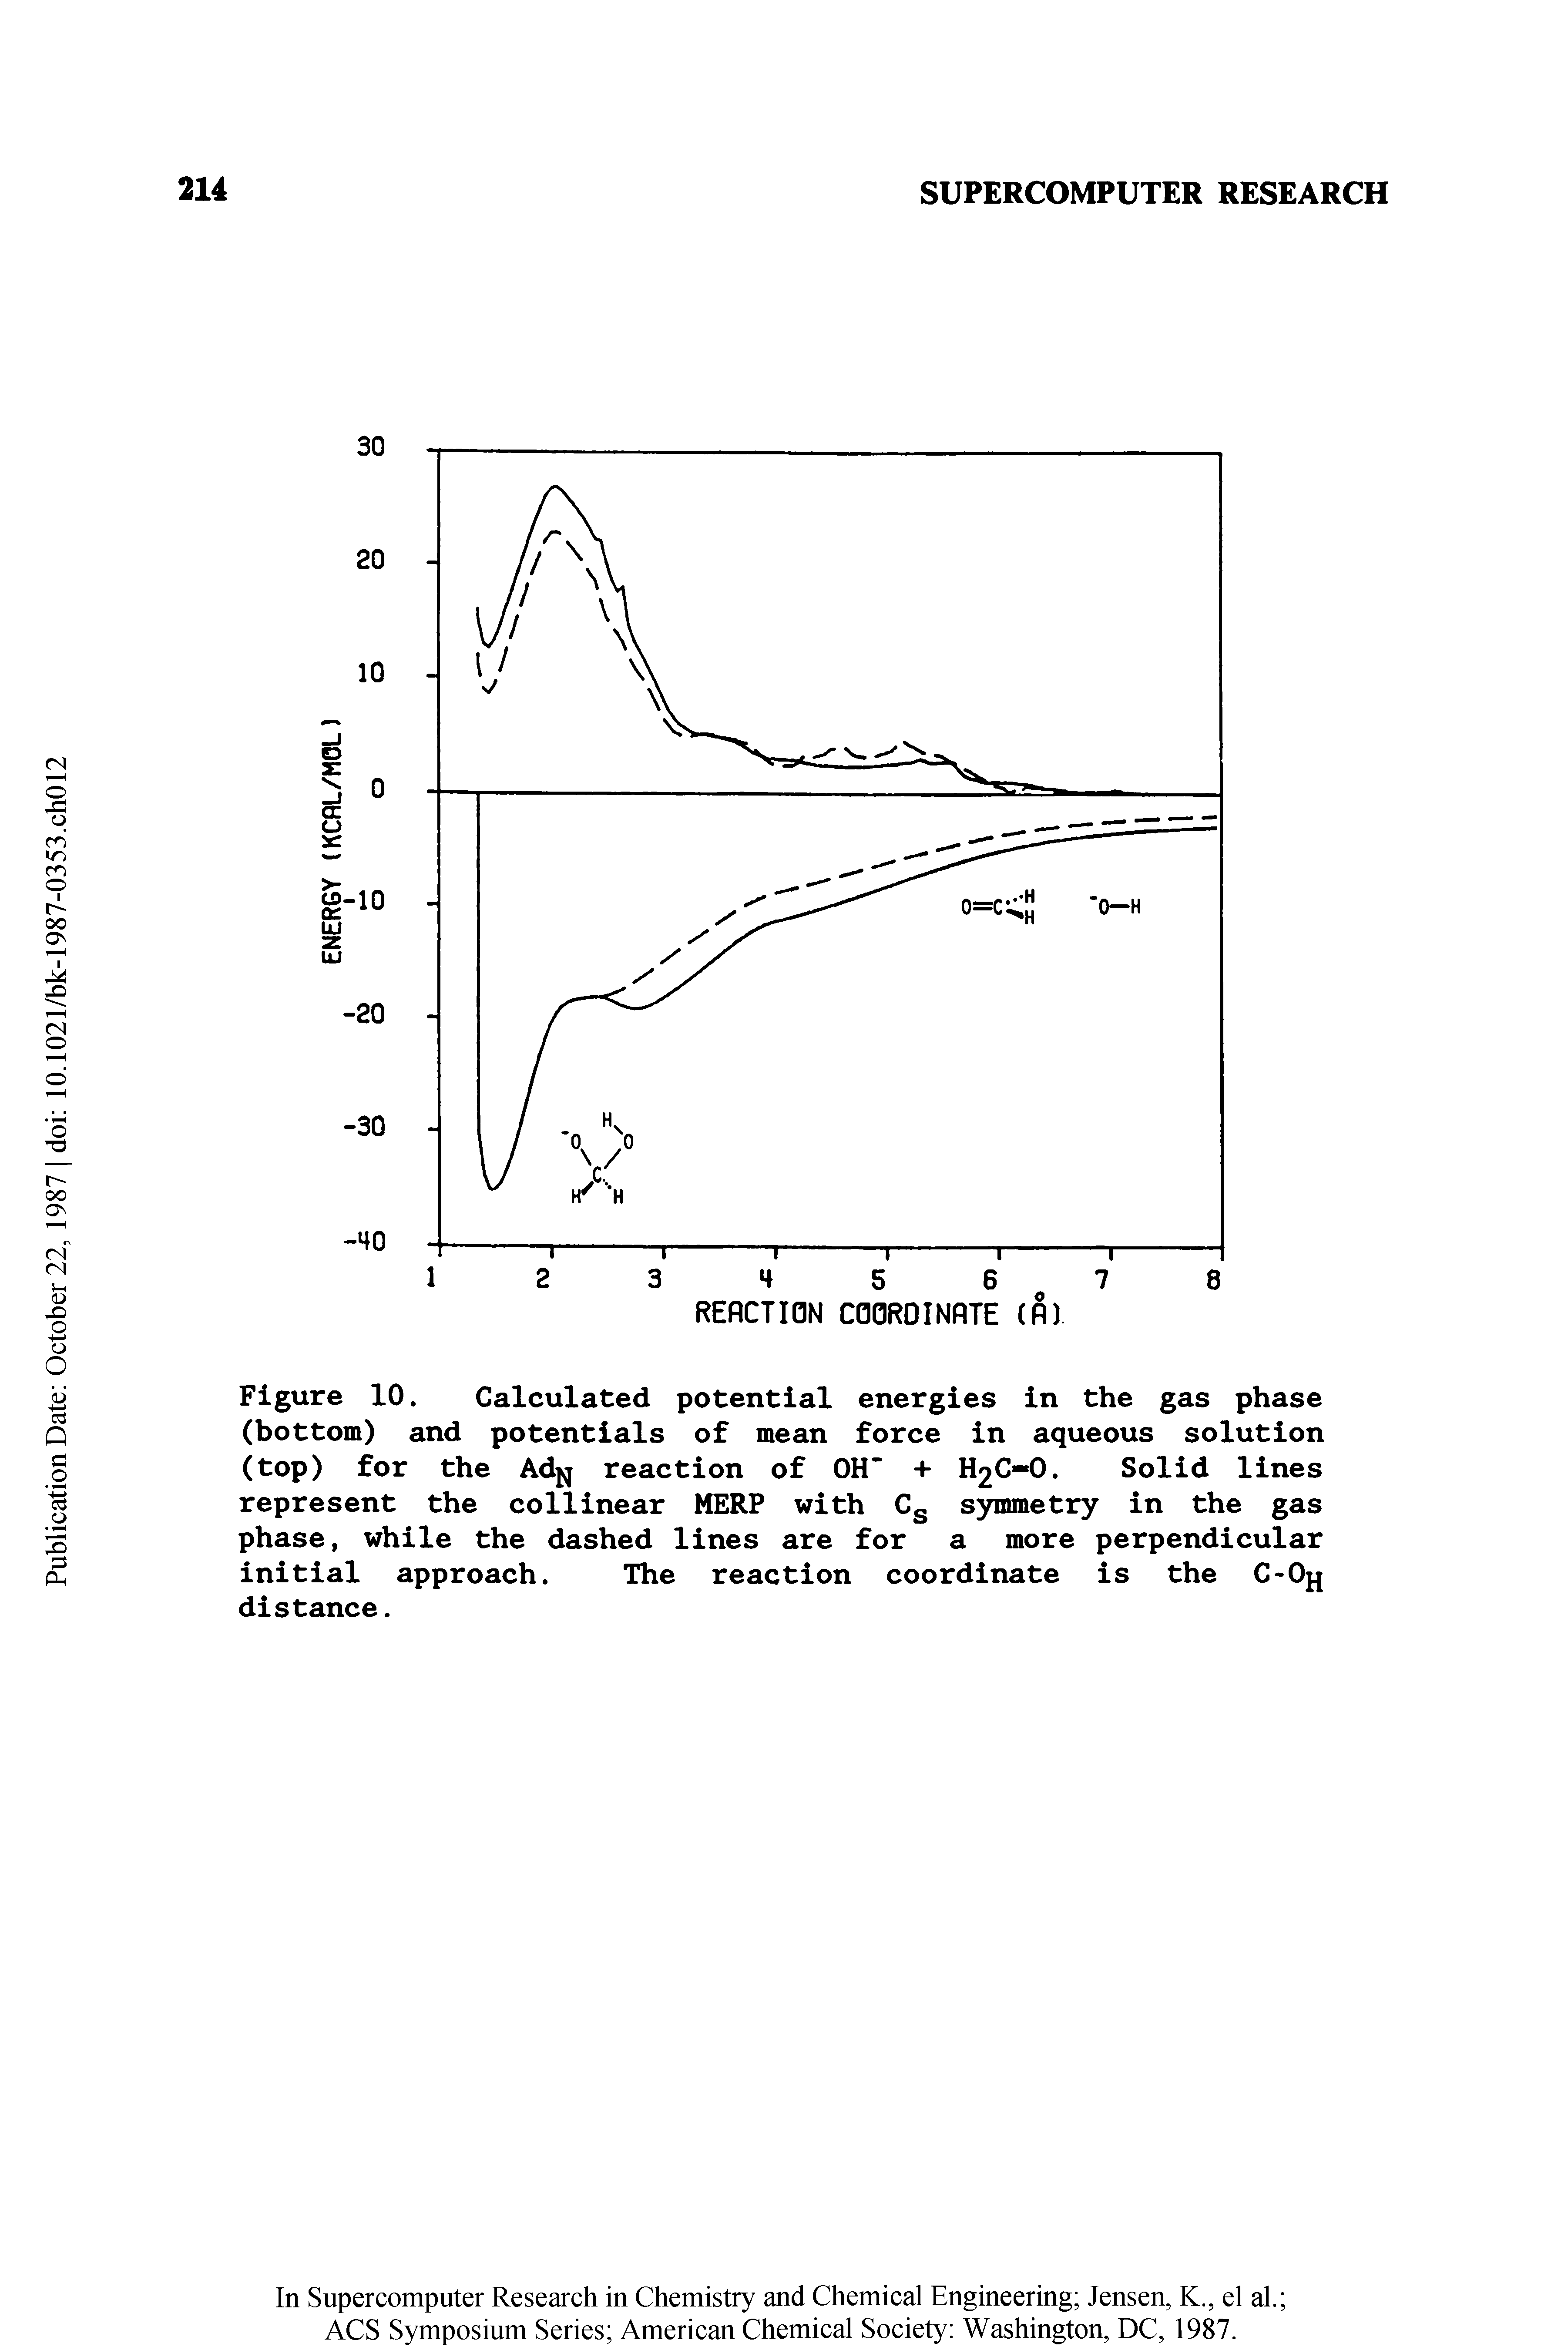 Figure 10. Calculated potential energies in the gas phase (bottom) and potentials of mean force in aqueous solution (top) for the Adjj reaction of OH + H2C-O. Solid lines...